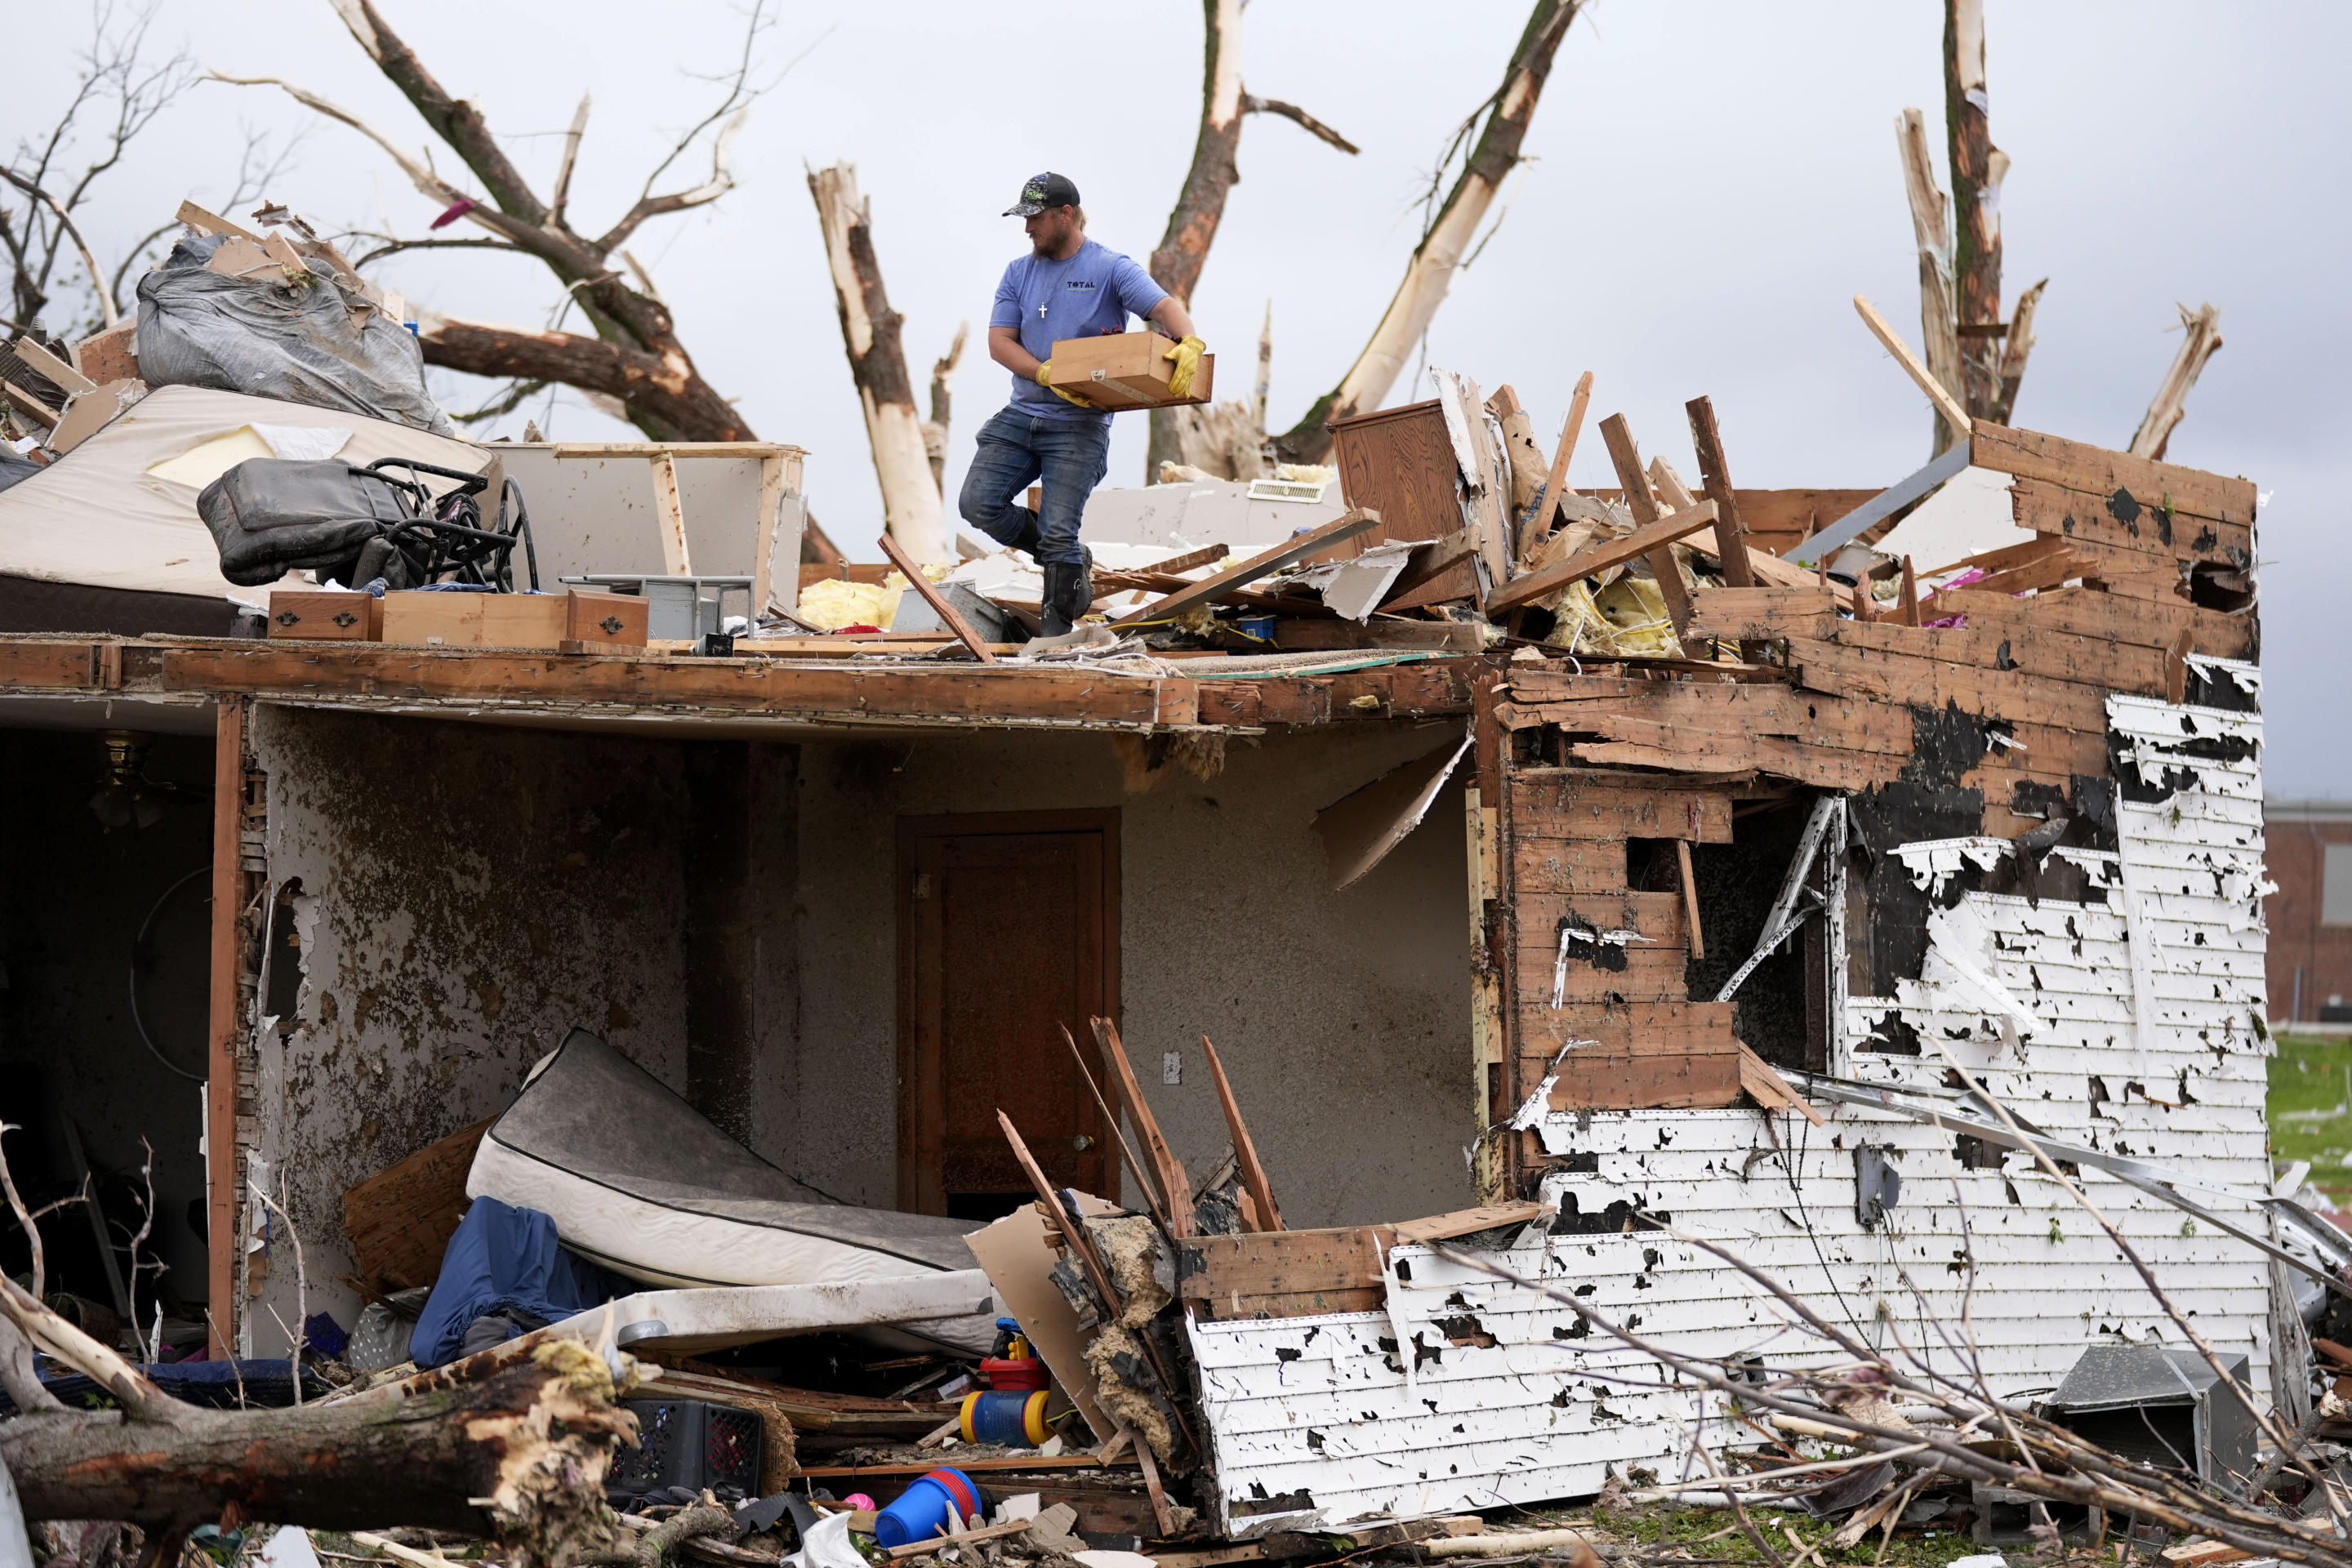 A man sorts through the remains of a home damaged by a tornado on Tuesday in Greenfield, Iowa.